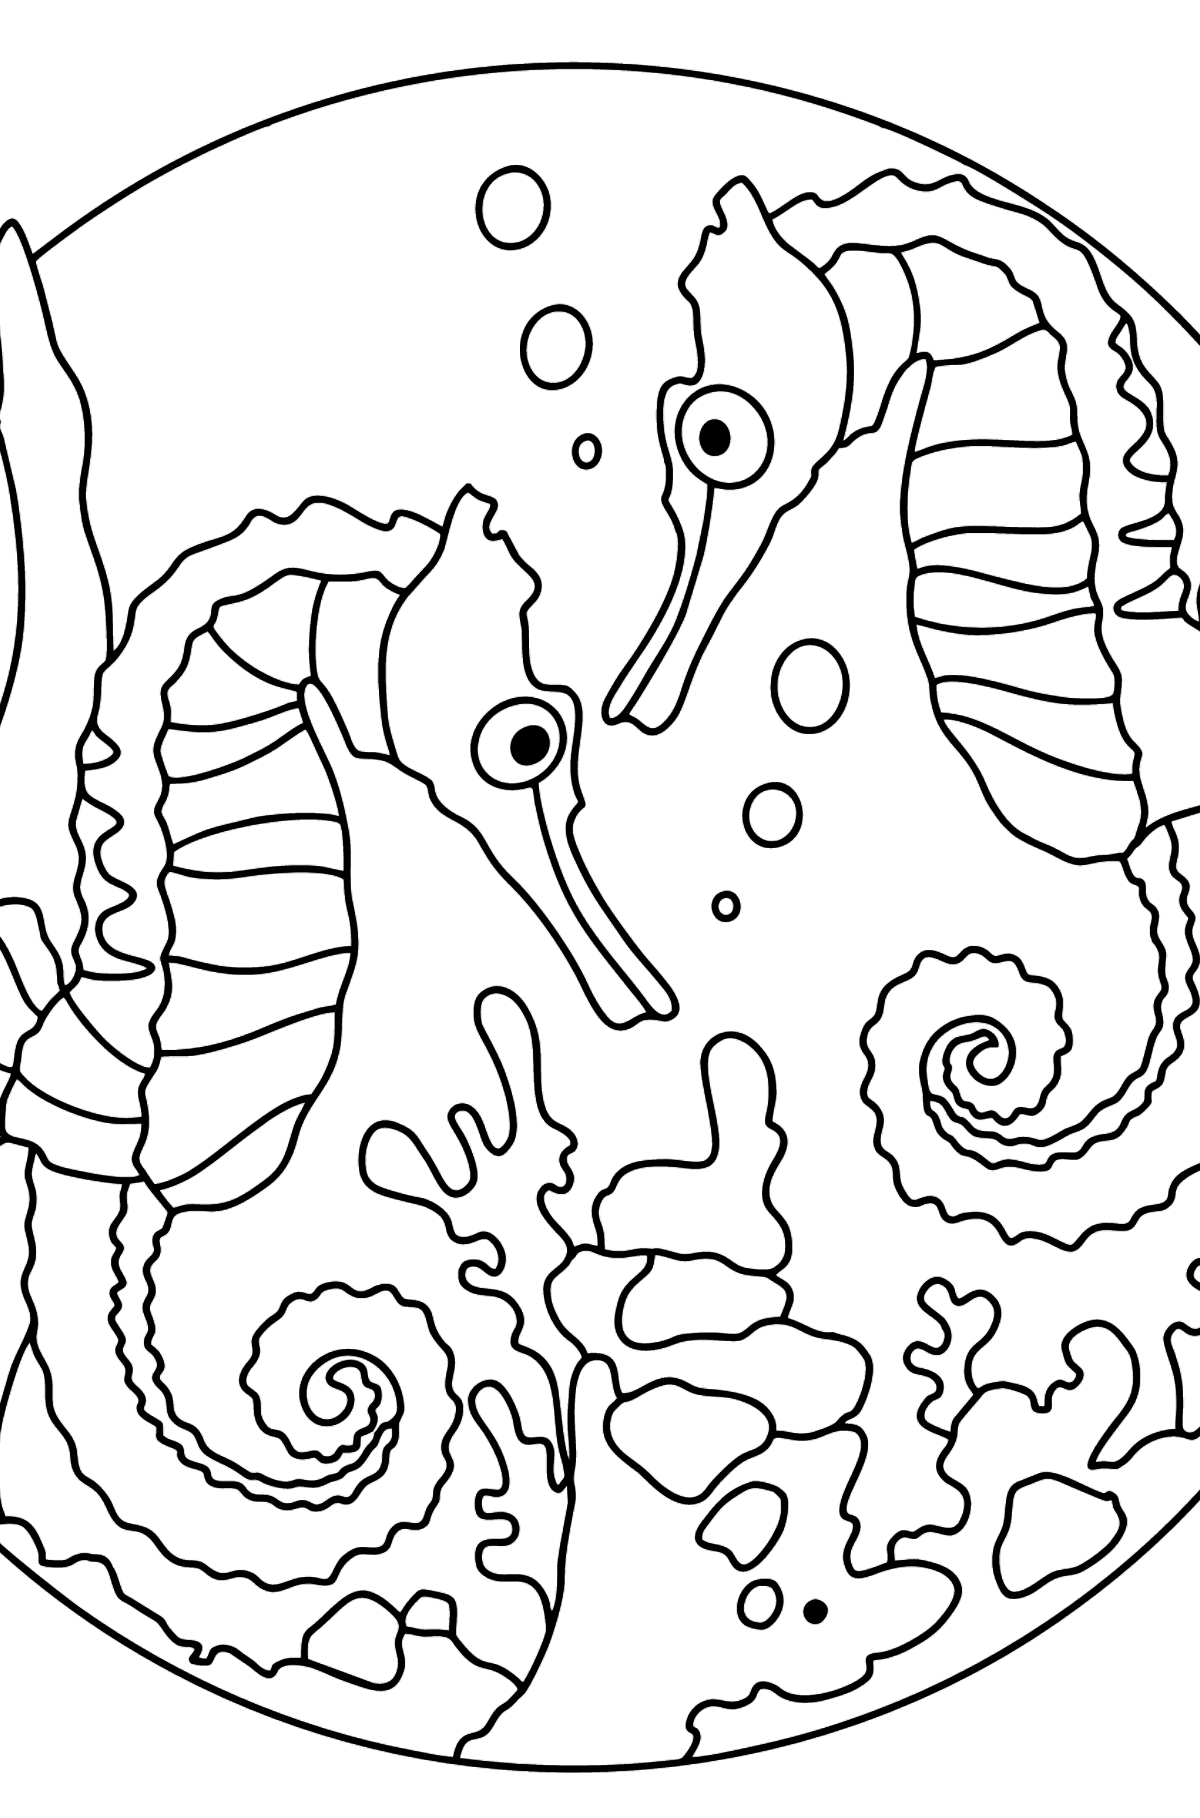 Two Seahorses Coloring Page - Coloring Pages for Kids